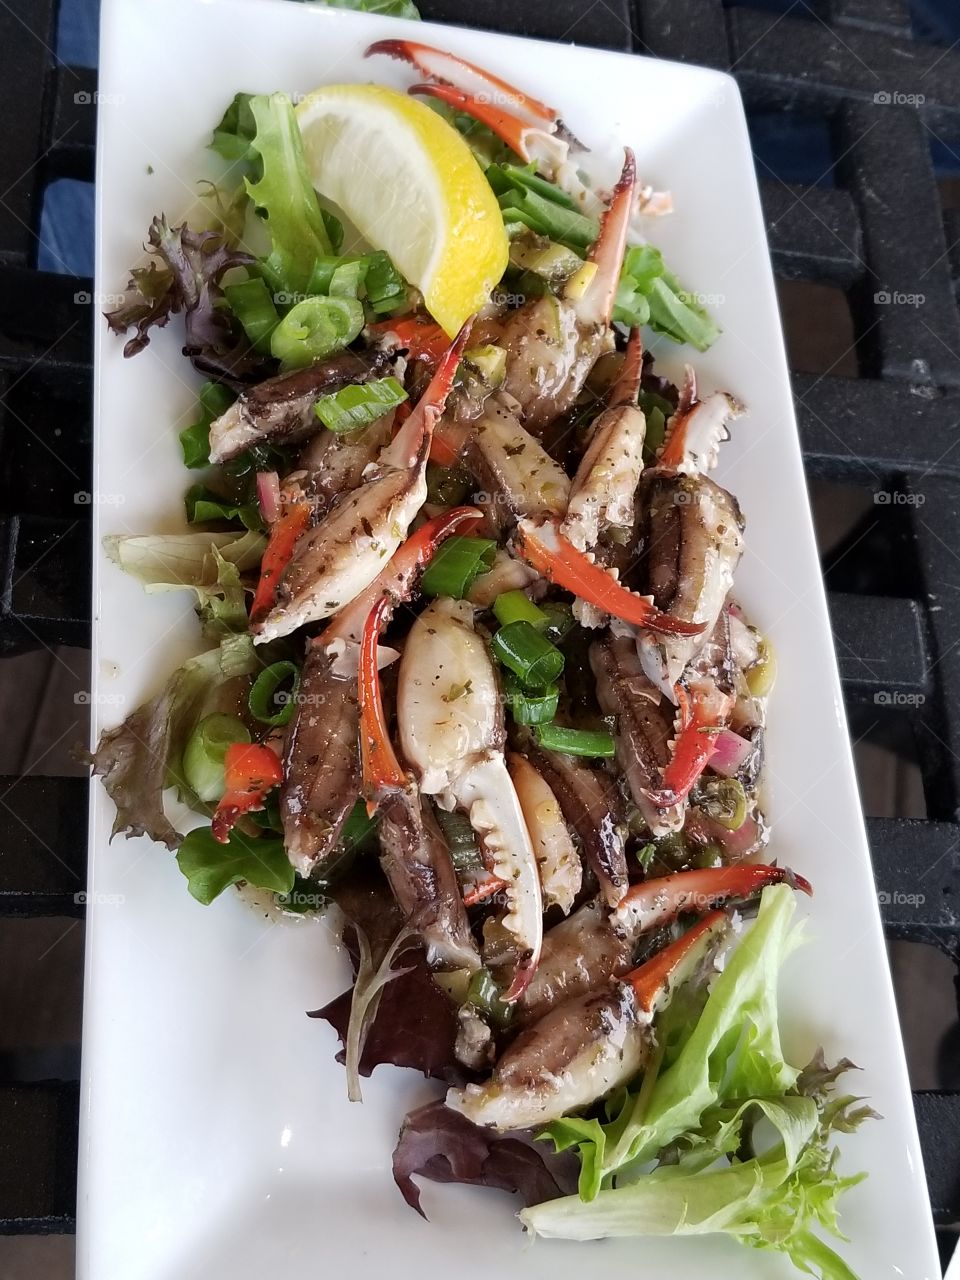 Marinated crab meat over mixed greens